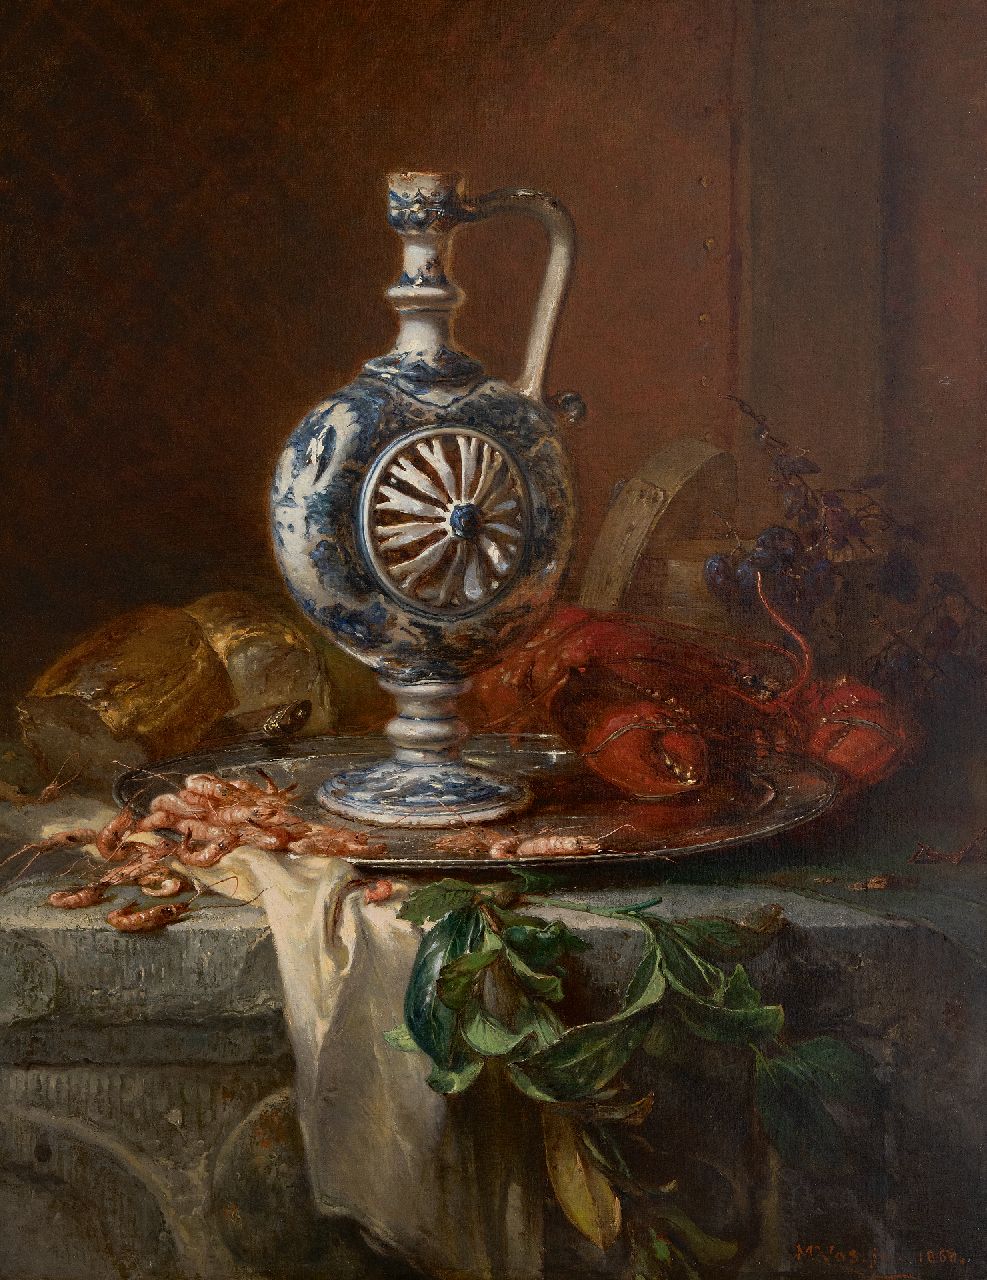 Vos M.  | Maria Vos | Paintings offered for sale | Still life with earthenware jug, pewter bowl, lobster and shrimp, oil on canvas 84.4 x 67.3 cm, signed l.r. and dated 'Jan' 1868